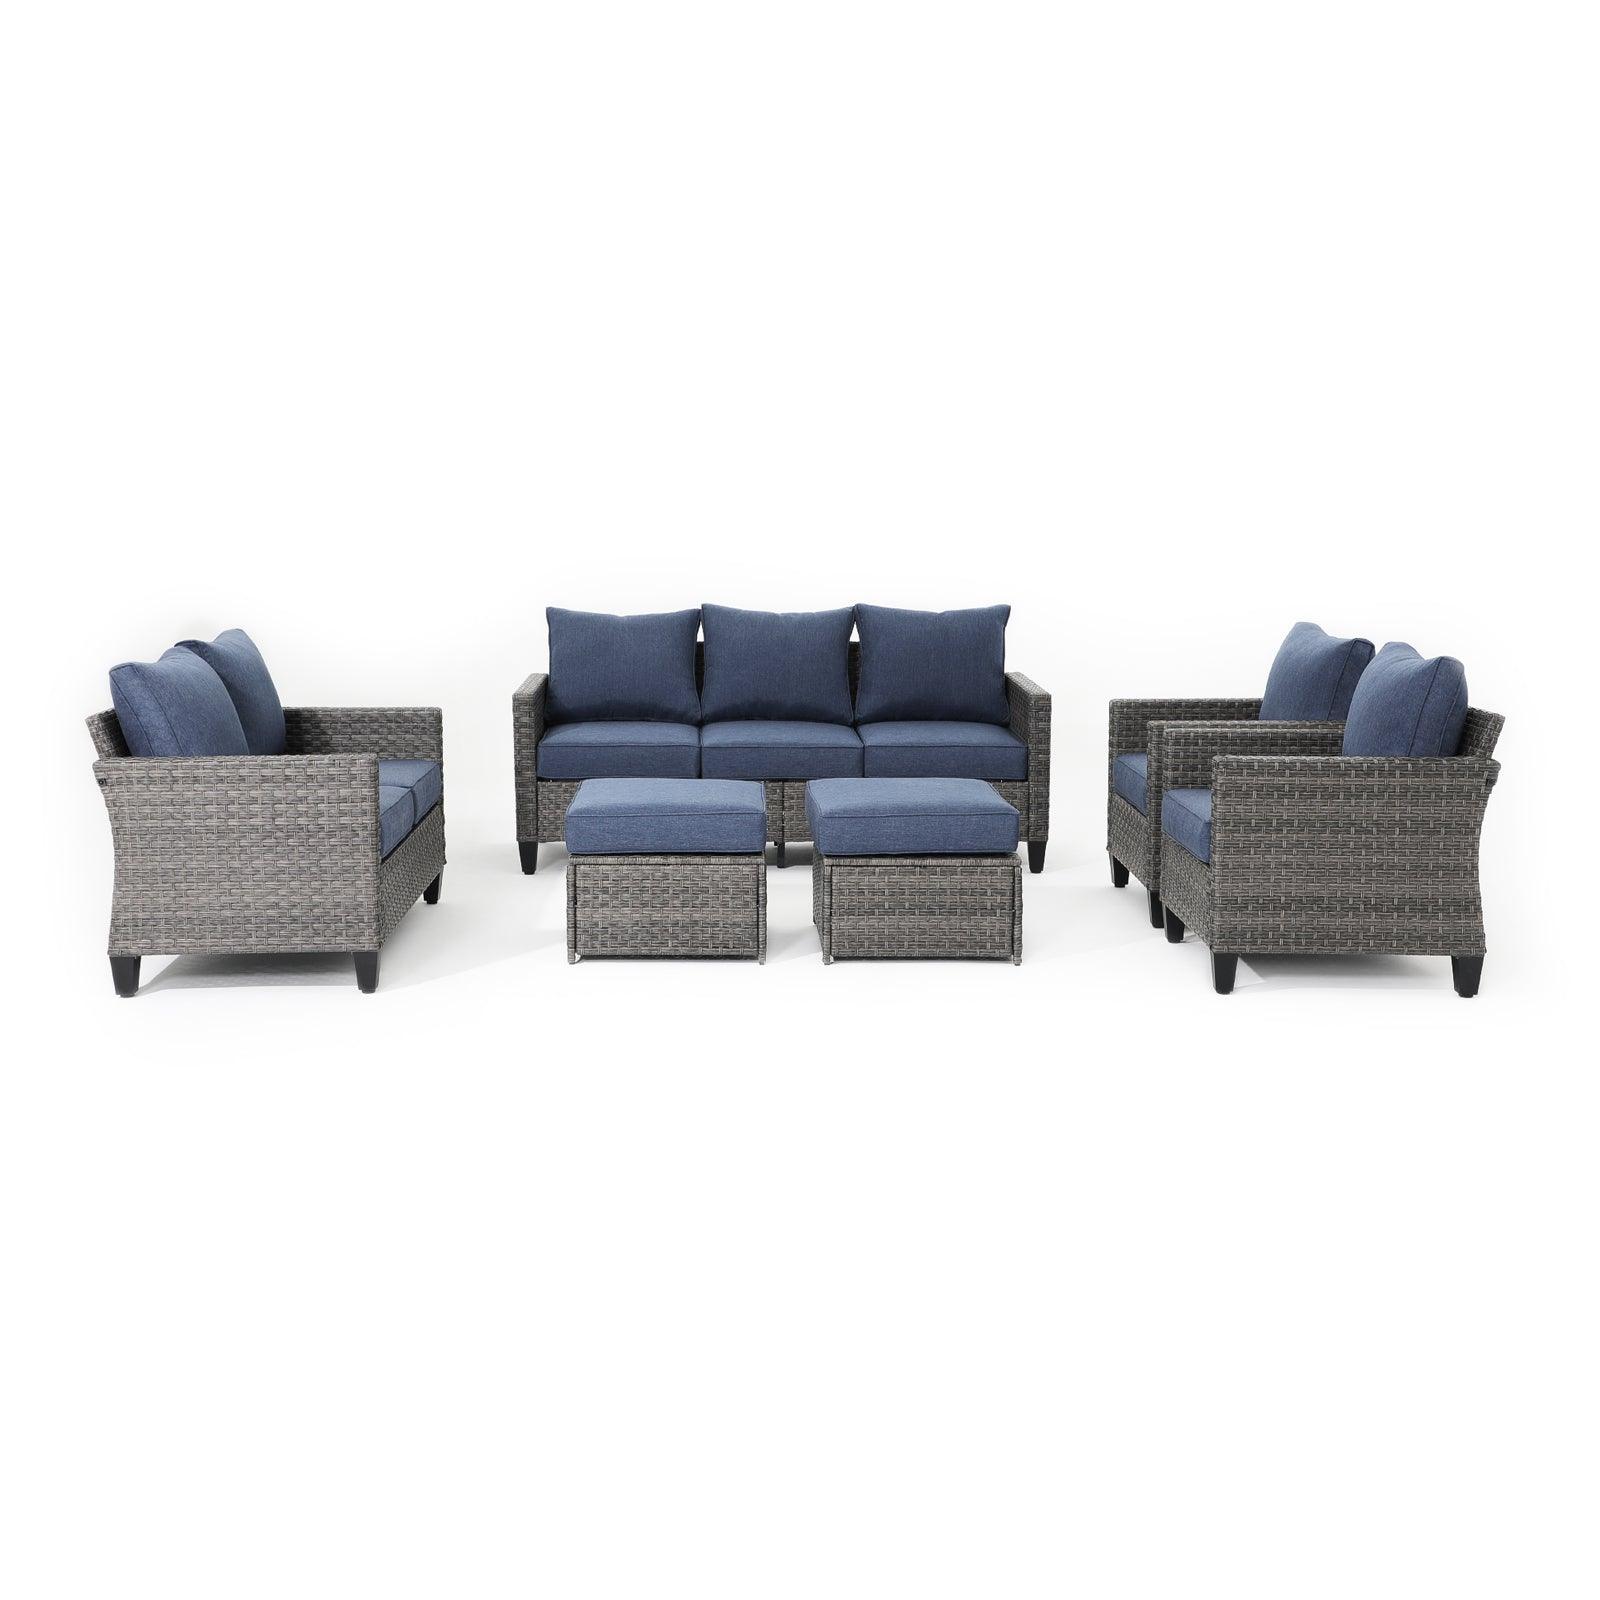 Ayia 6-Piece outdoor Sofa Set with Rattan design, Navy Blue  cushions, a 3-seater sofa, 2 arm chairs , 2 ottomans, 1 loveseat,front view- Jardina Furniture #color_Navy blue#piece_6-pc. with ottomans